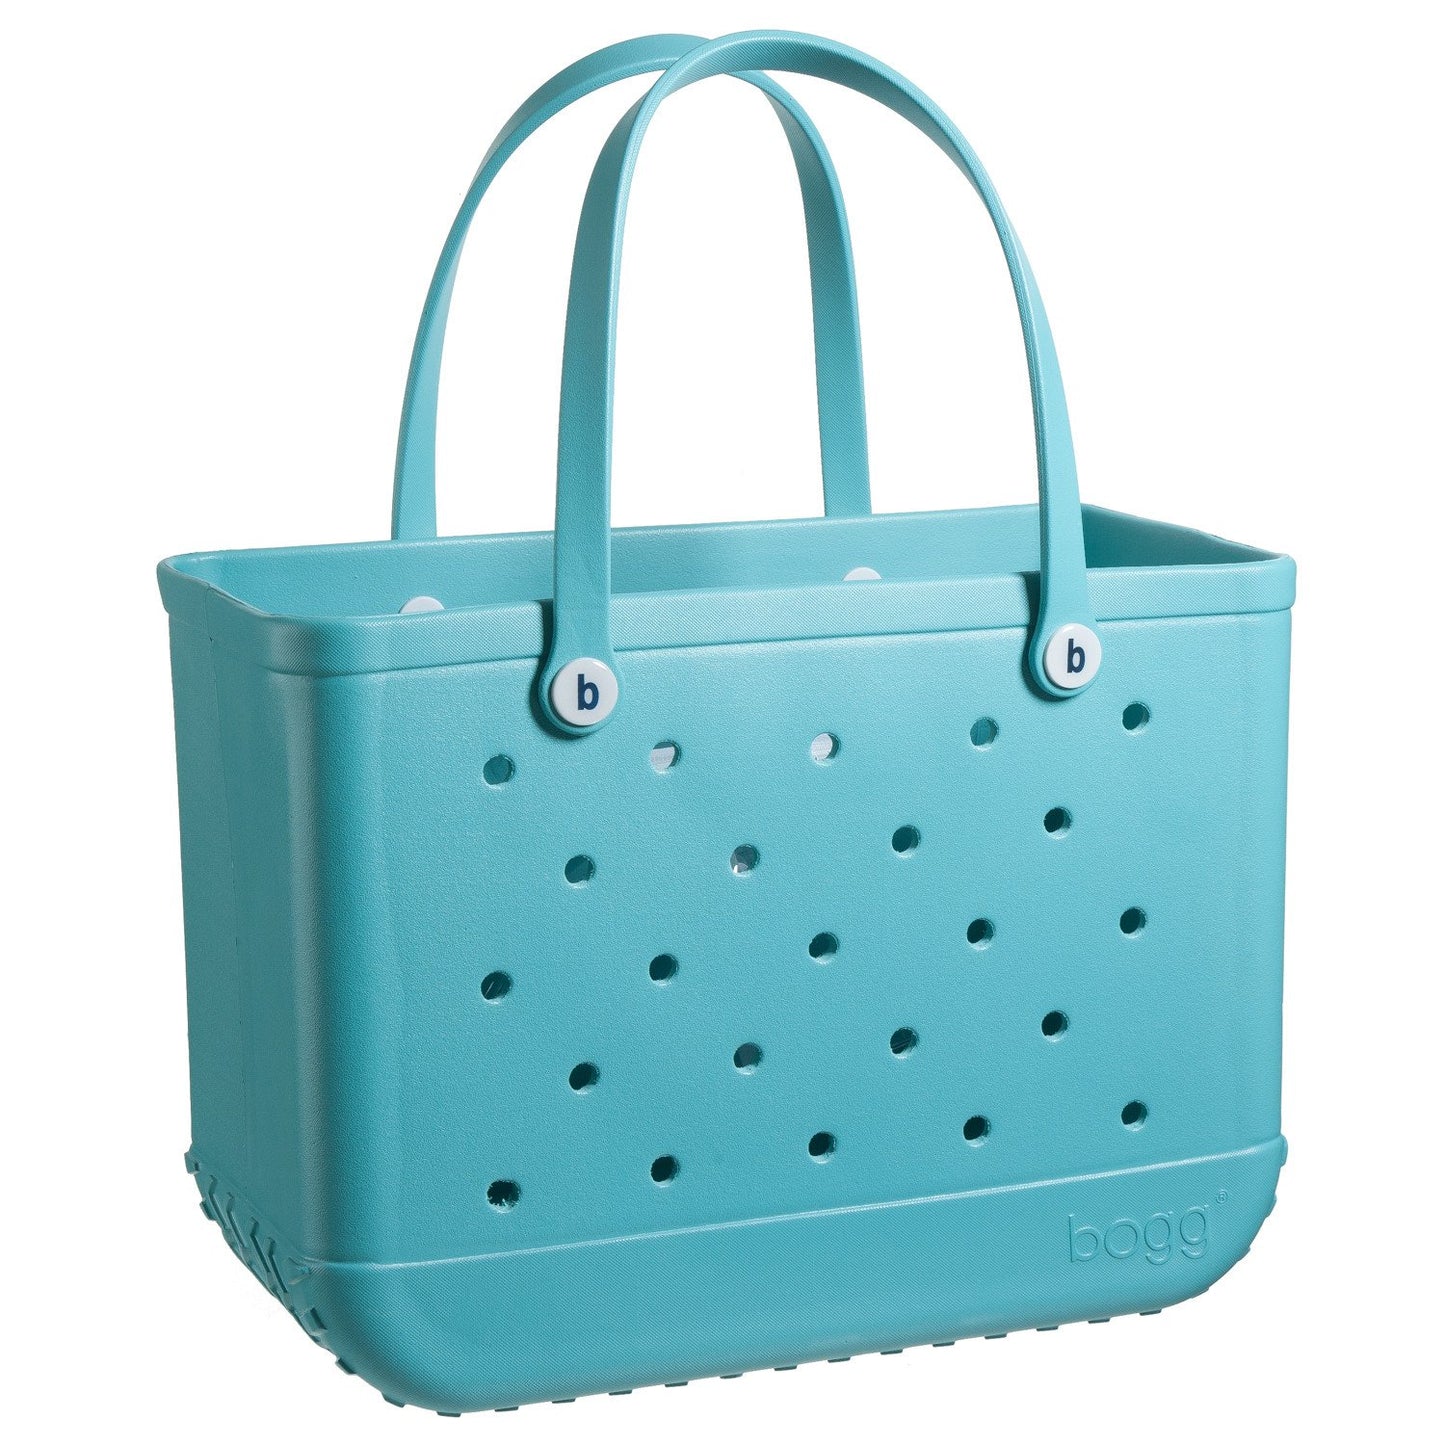 Turquoise & Caicos Bogg Bag